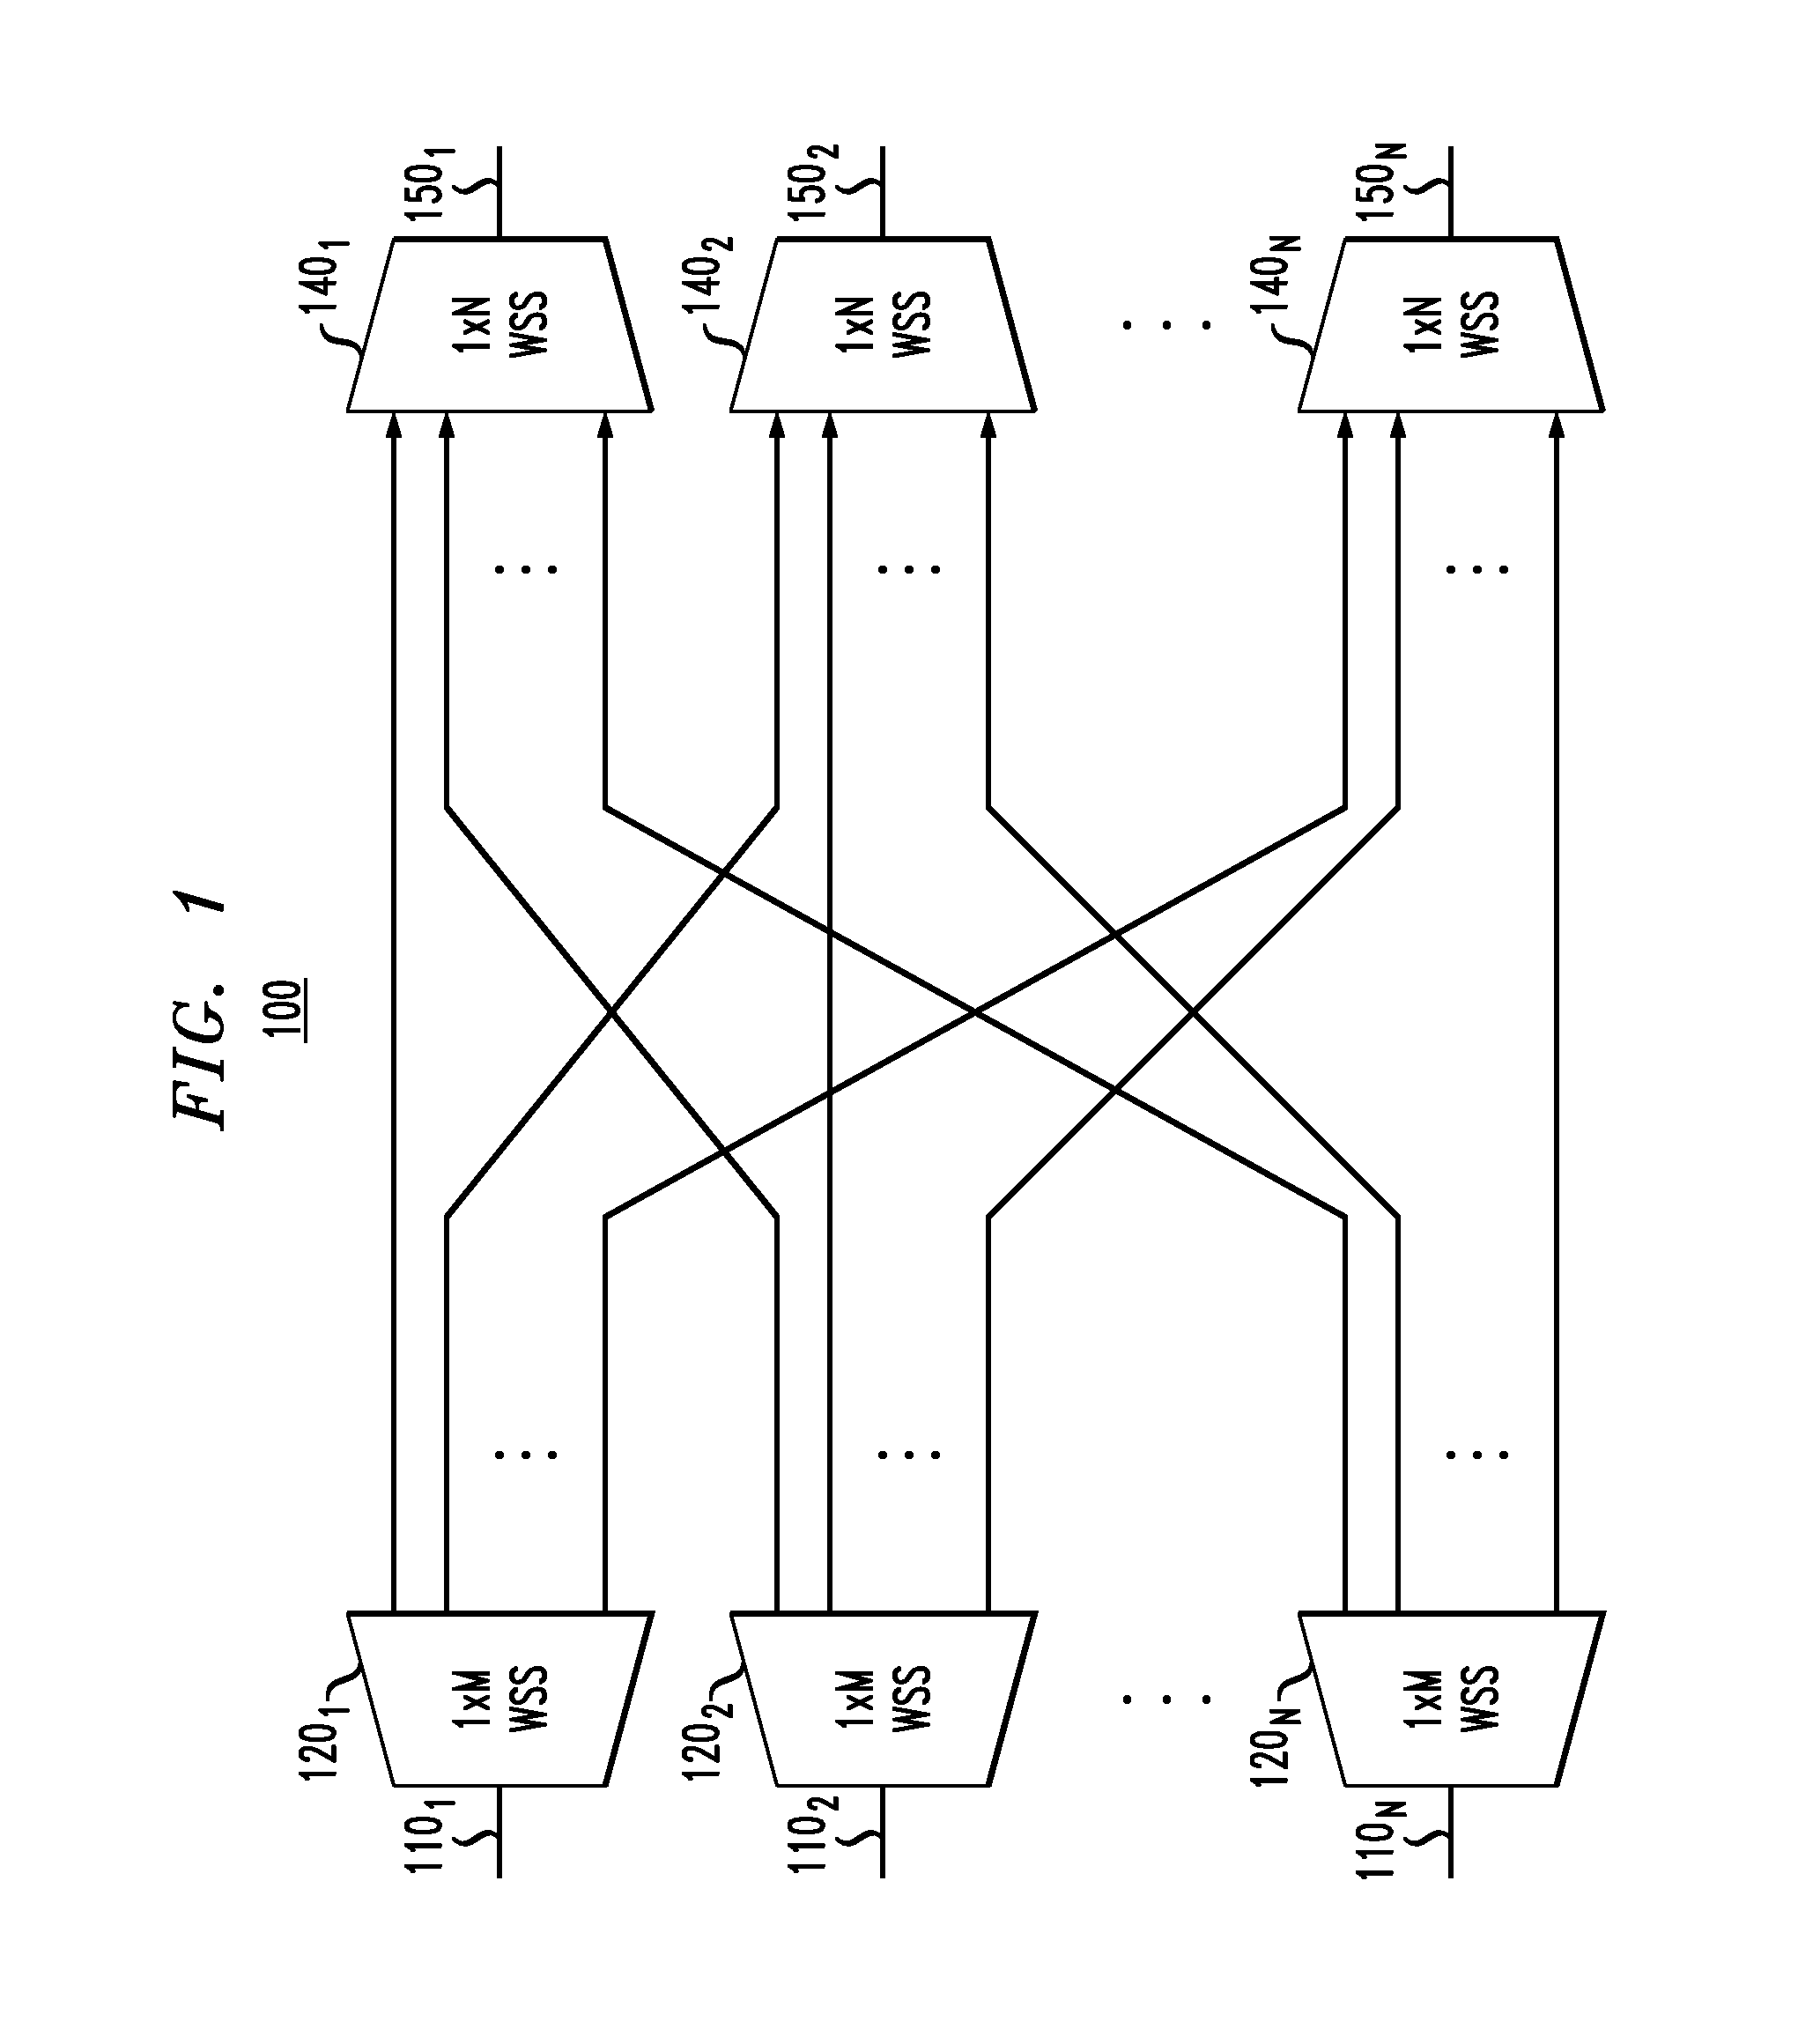 Compact wavelength-selective cross-connect device having multiple input ports and multiple output ports